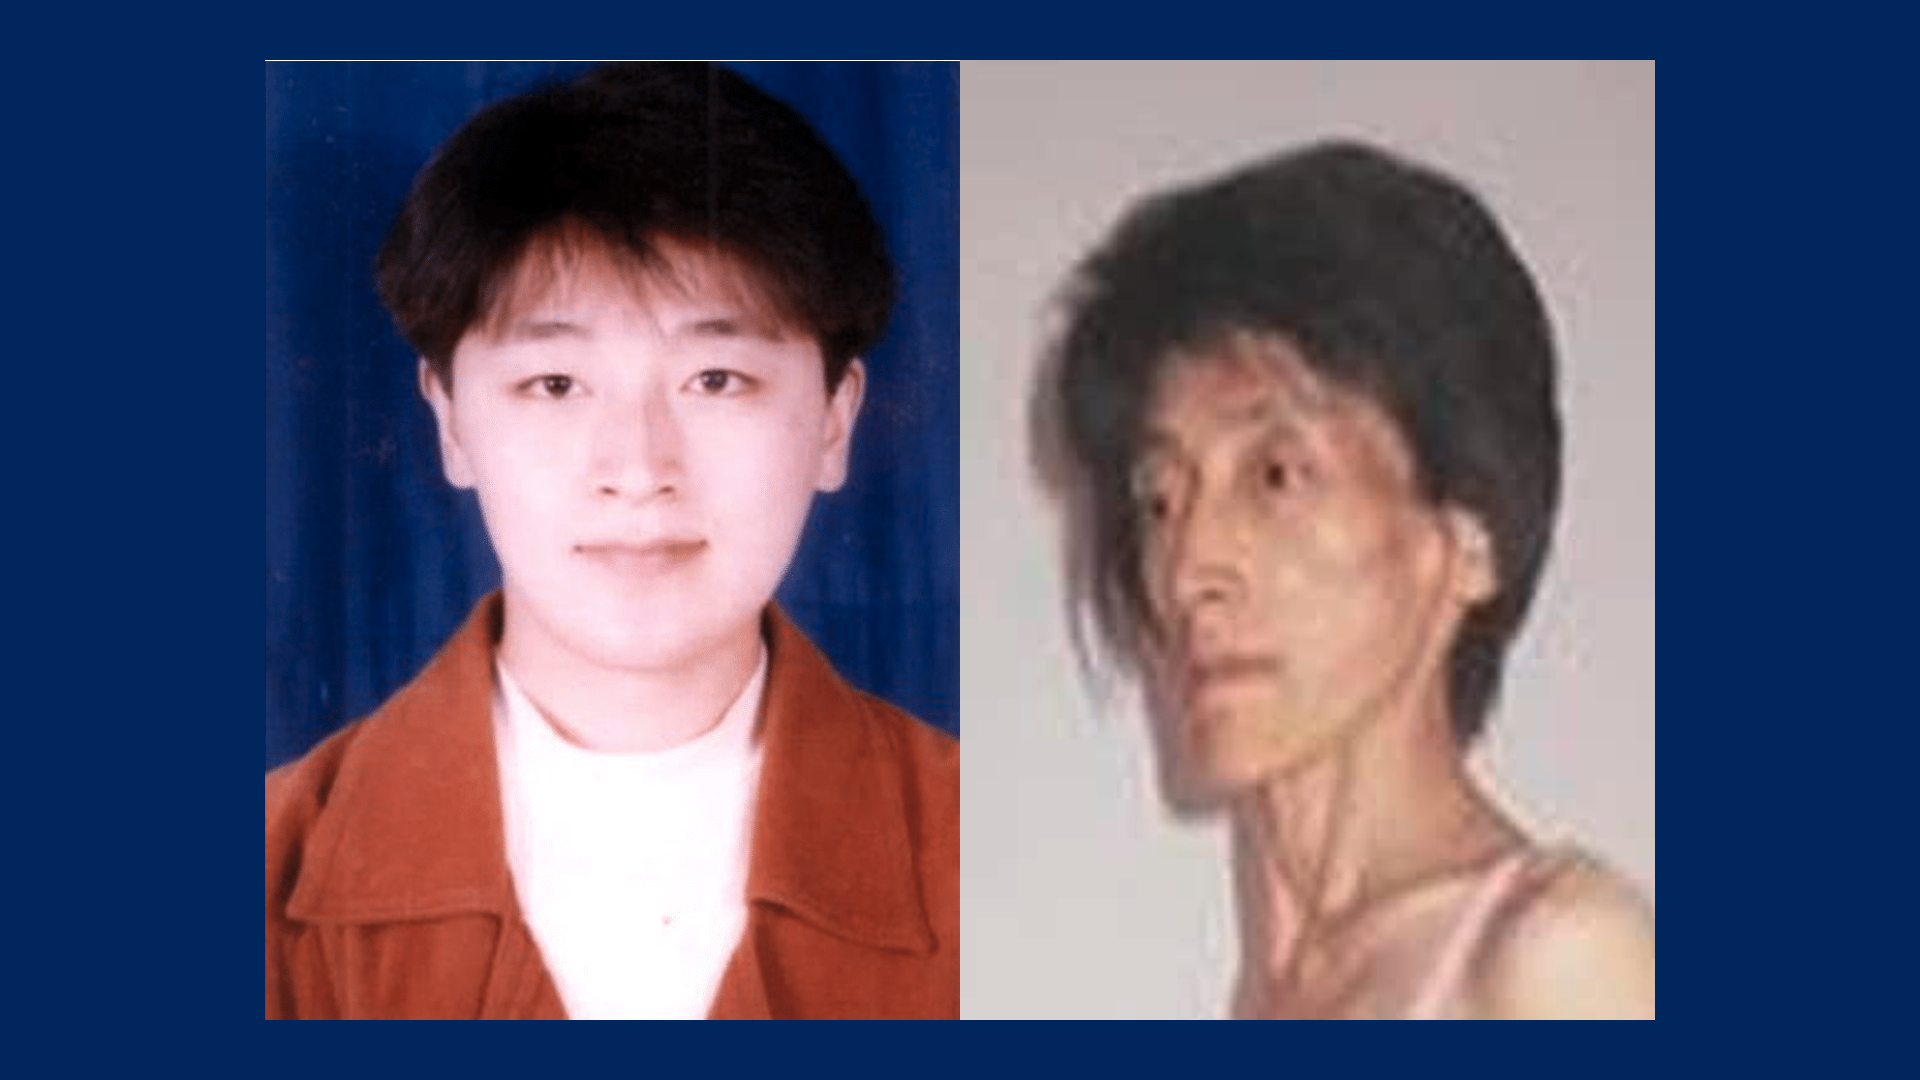 Ms. Song Yanqun with a healthy appearance before (left) and emancipated complexion after enduring 12 years of torture (right). 